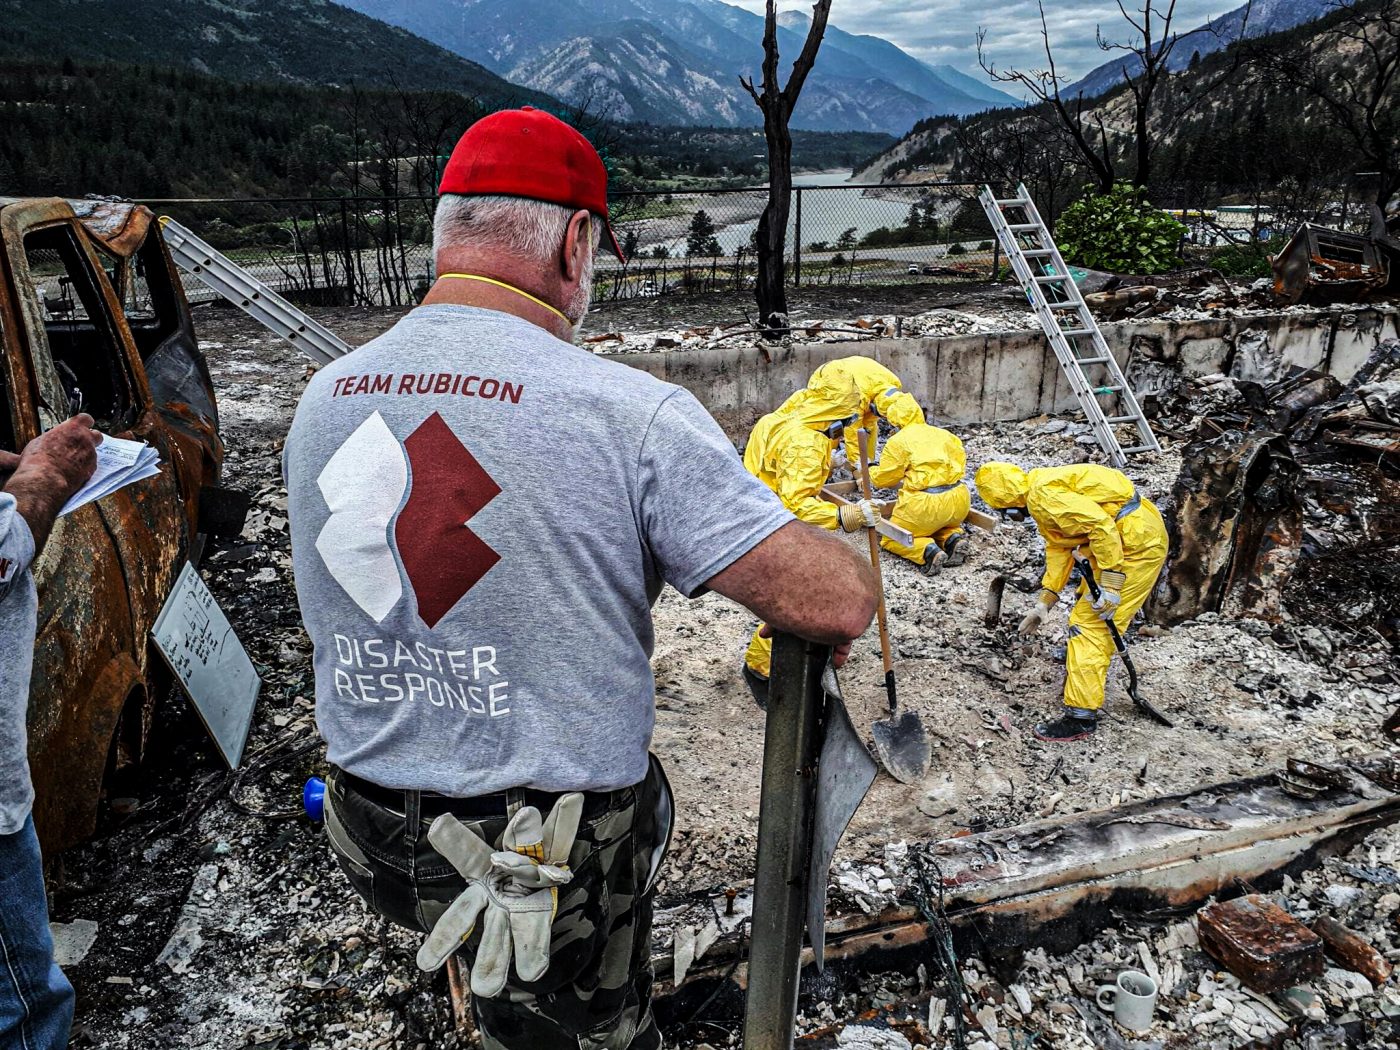 Volunteer with Team Rubicon Team Rubicon